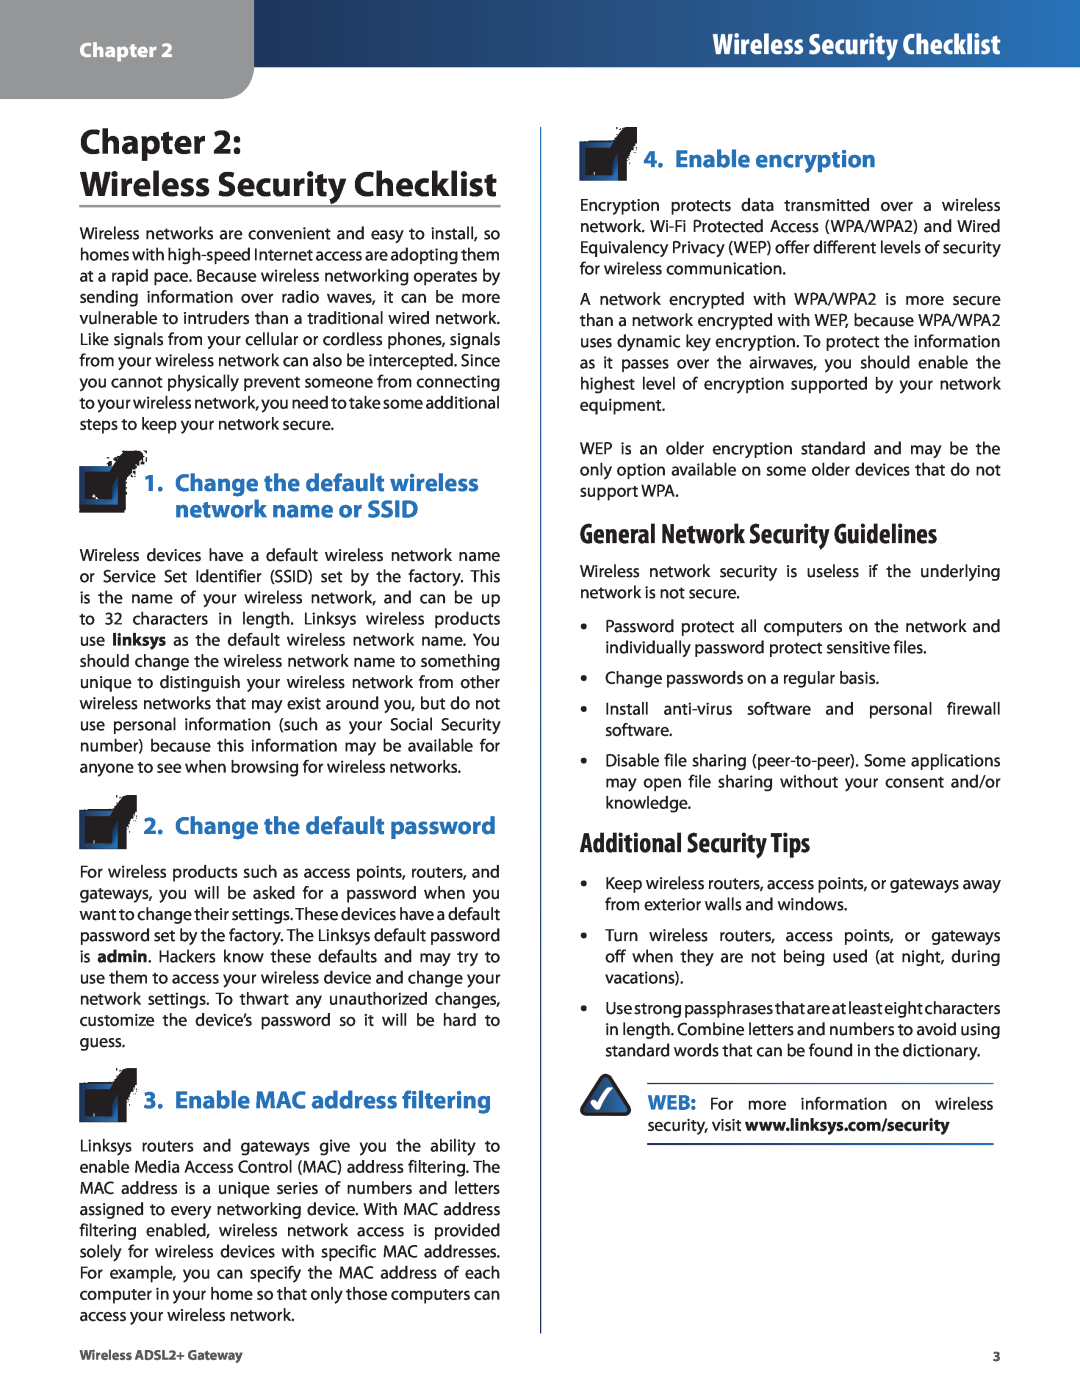 Linksys WAG160N, WAG110 Chapter Wireless Security Checklist, General Network Security Guidelines, Additional Security Tips 